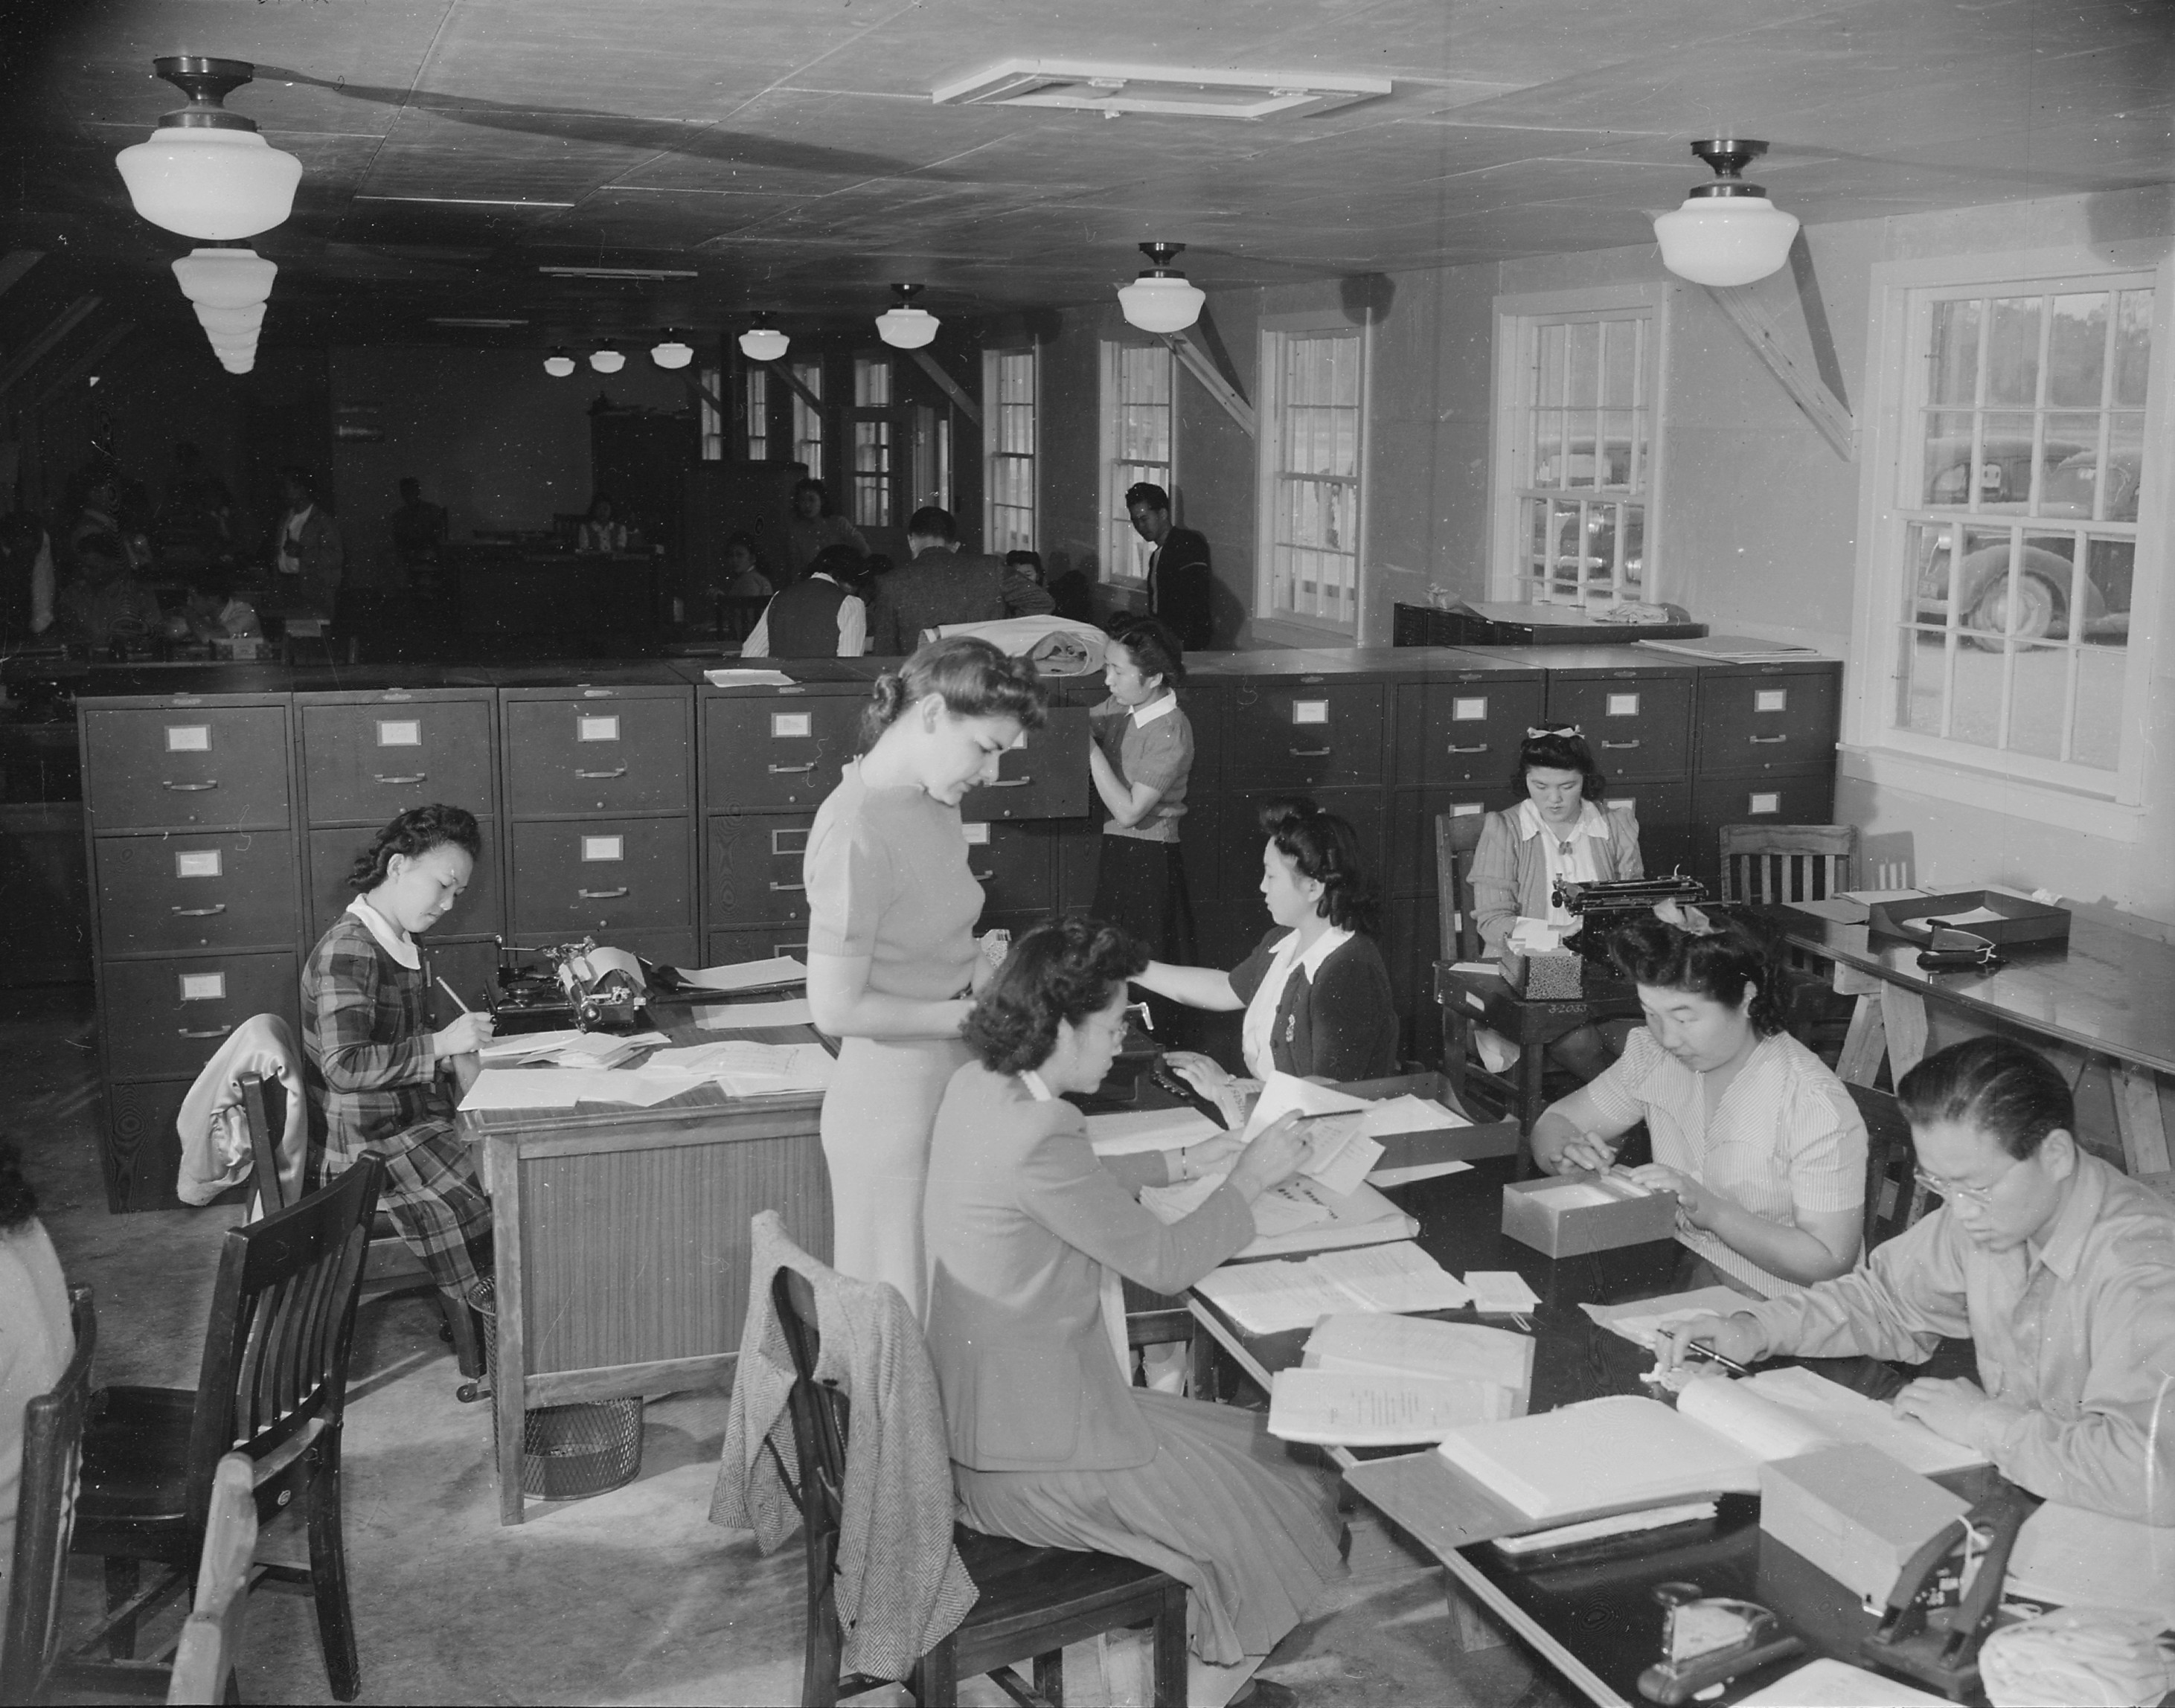 Workers at the office of Personnel Records Section, Jerome War Relocation Center, Arkansas, United States, 19 Nov 1942